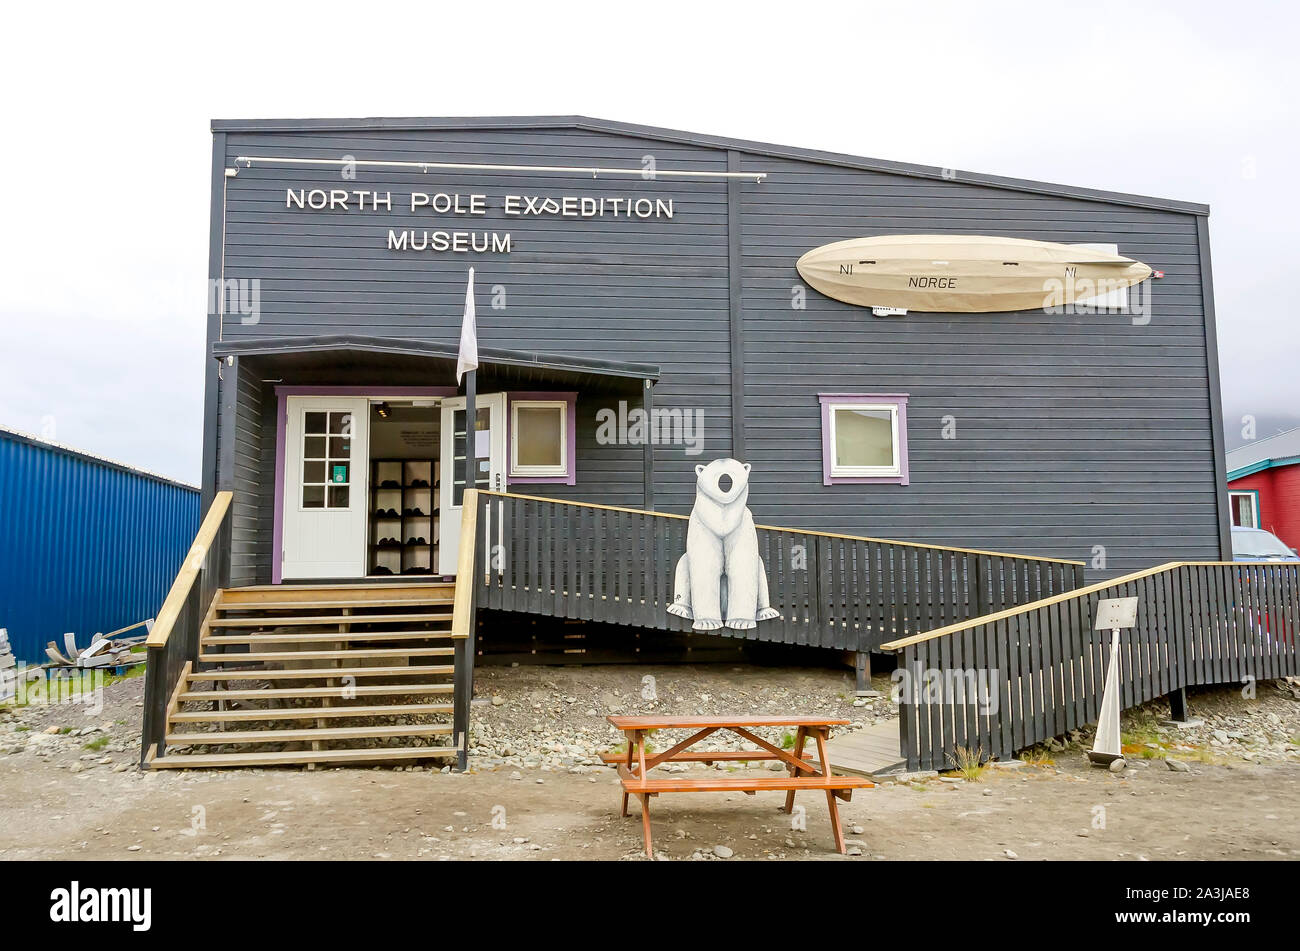 North Pole Expedition Museum, Longeyearben, Svalbard, Norway, world's northjern-most settlement Stock Photo